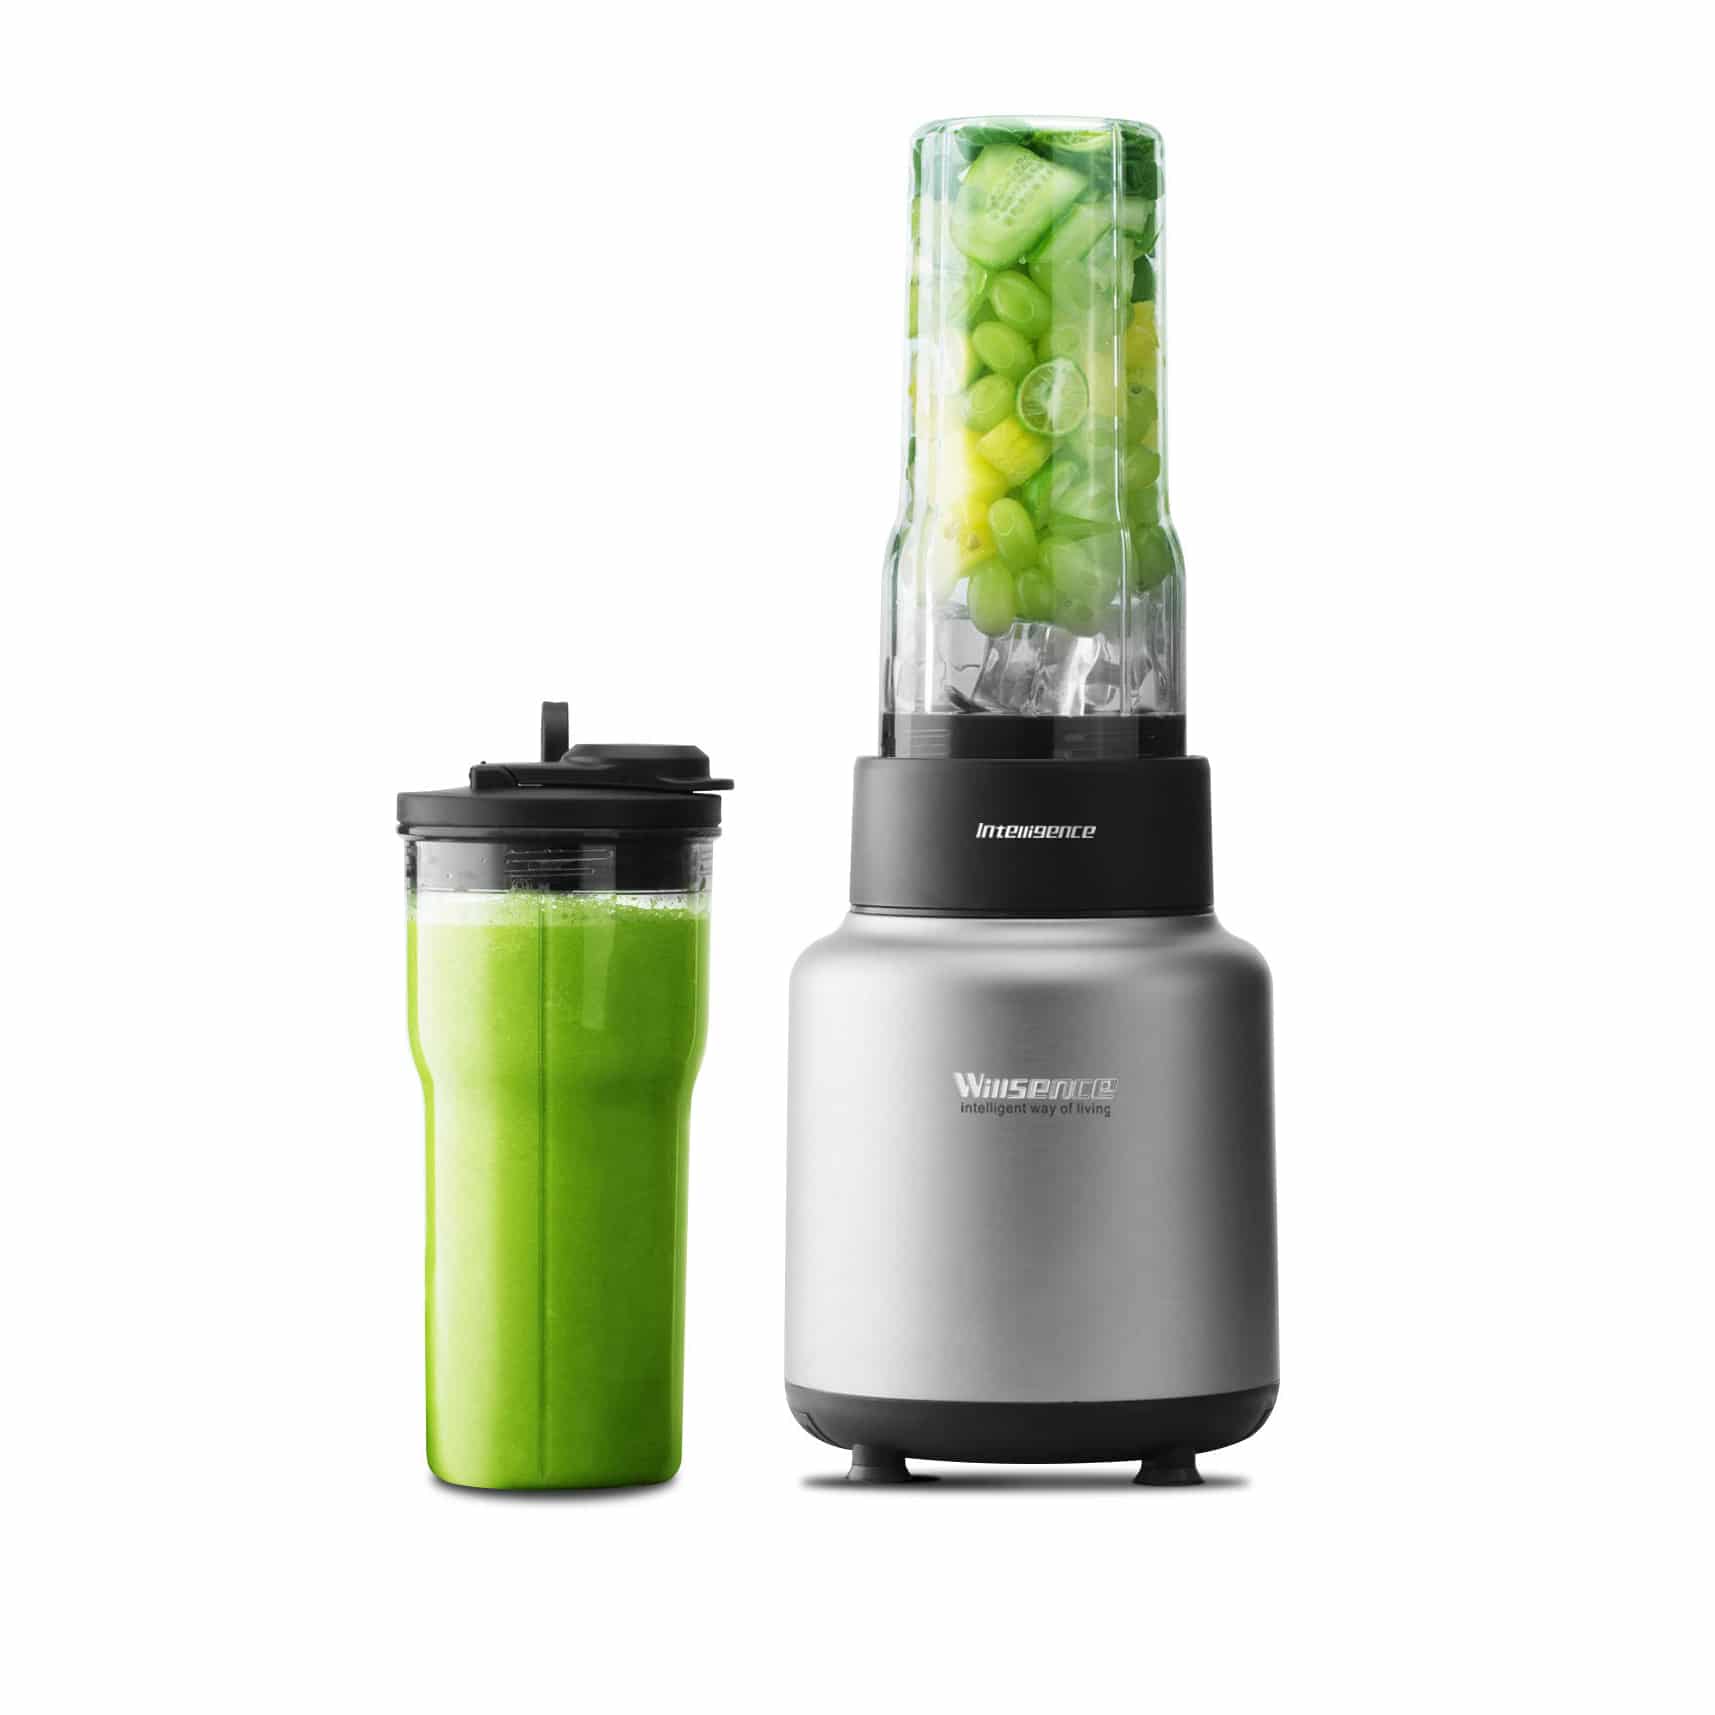 Top 10 Best Blender for Smoothies in 2021 Review Guide